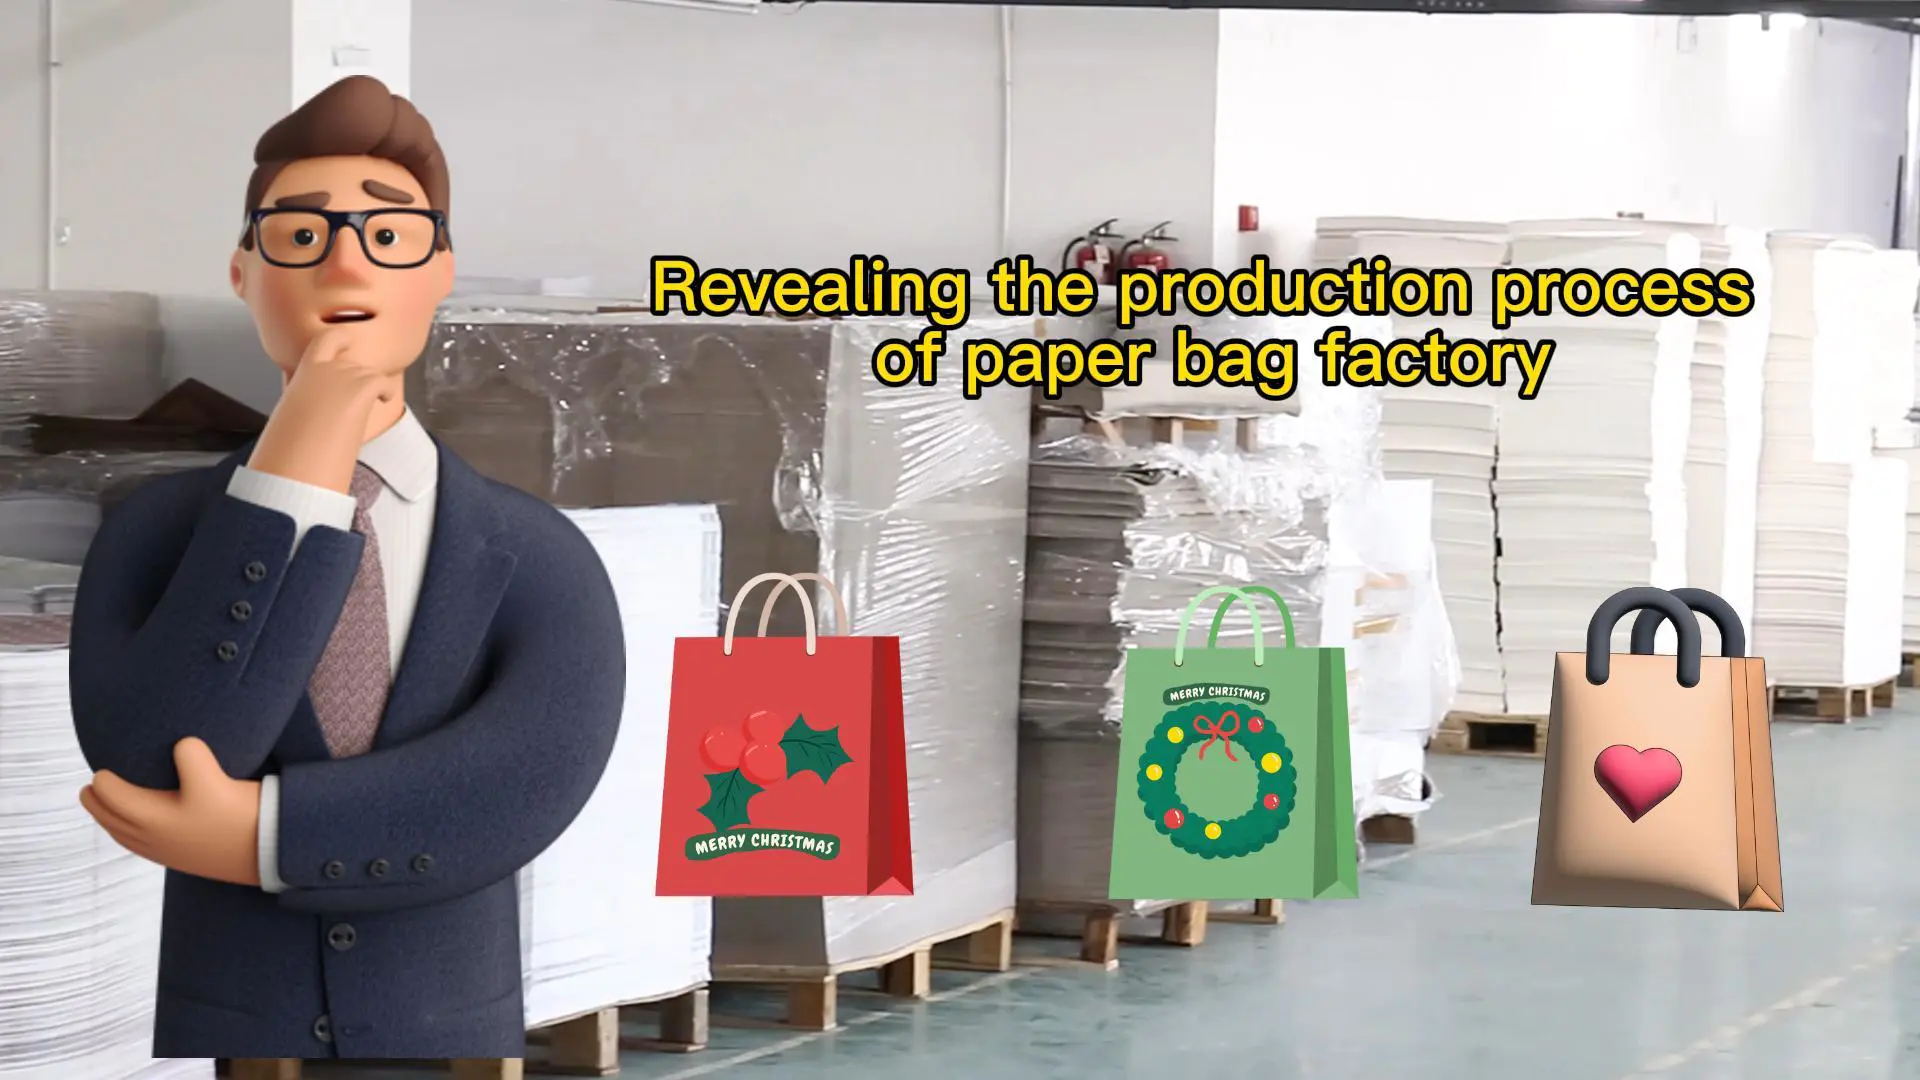 How much do you know about the manufacturing process of paper bags?